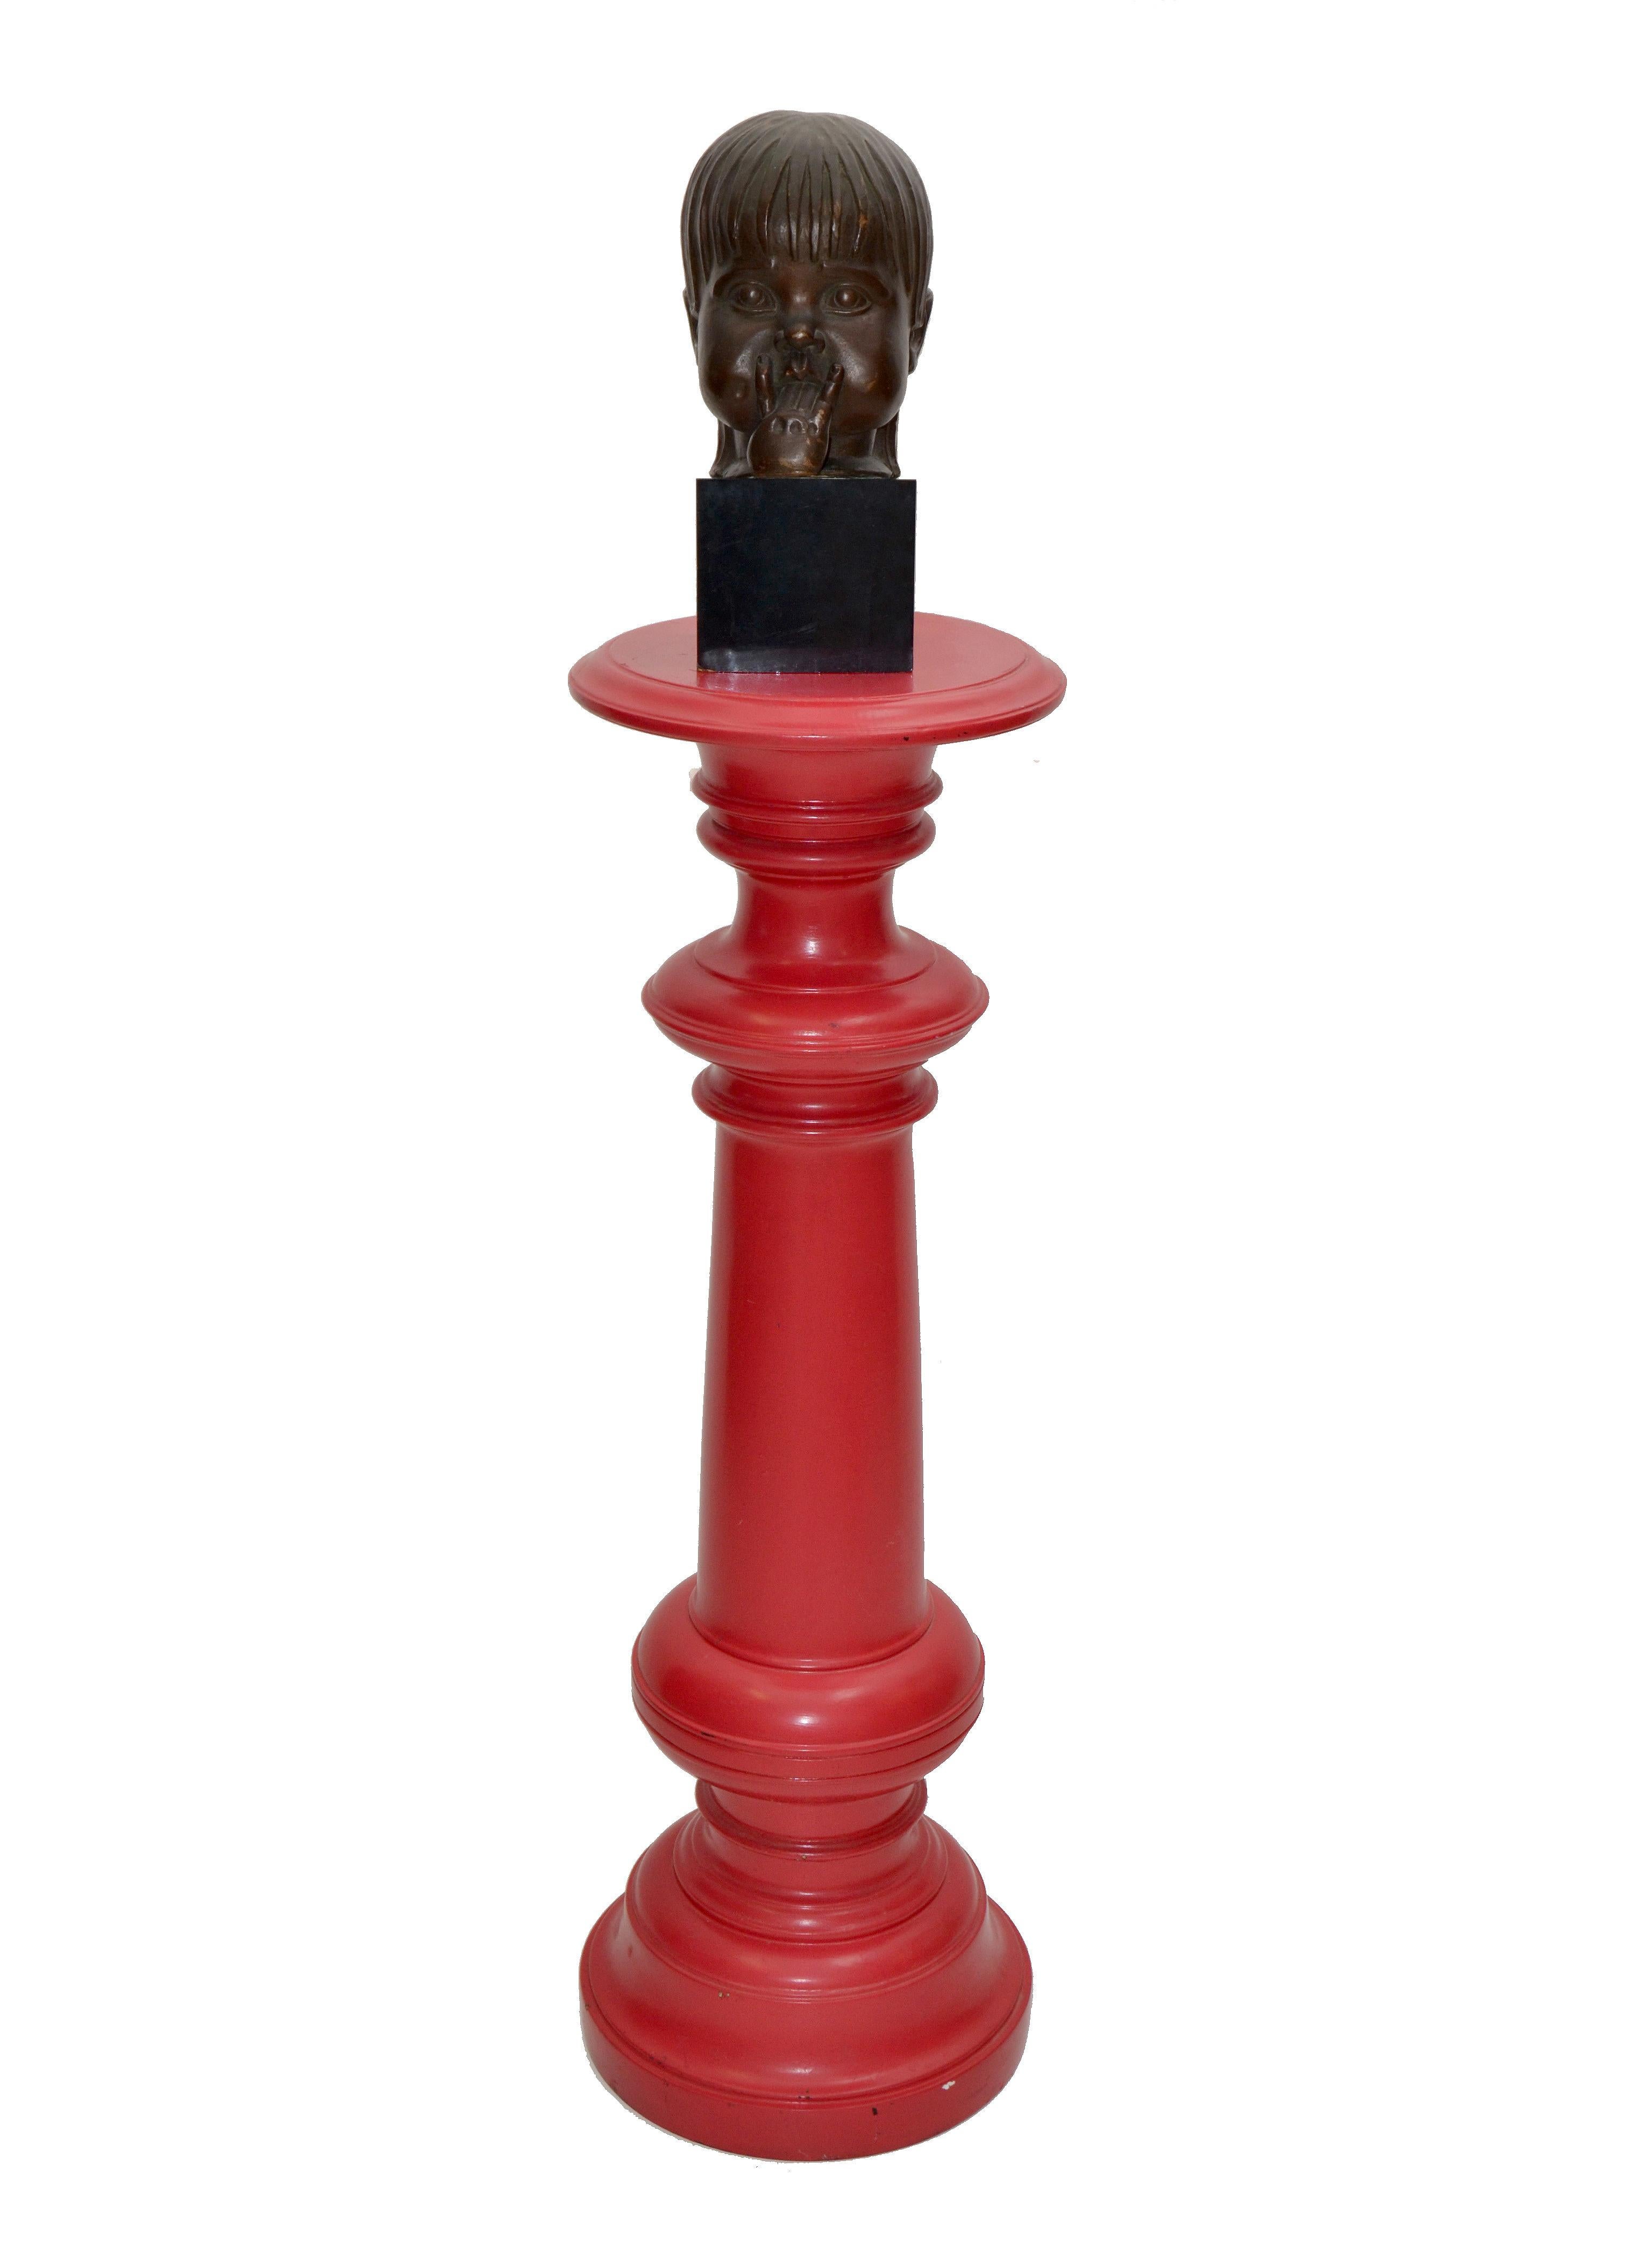 American Tall Mid-Century Modern Turned Wood Red Finish Plant Stand Sculpture Pedestal For Sale